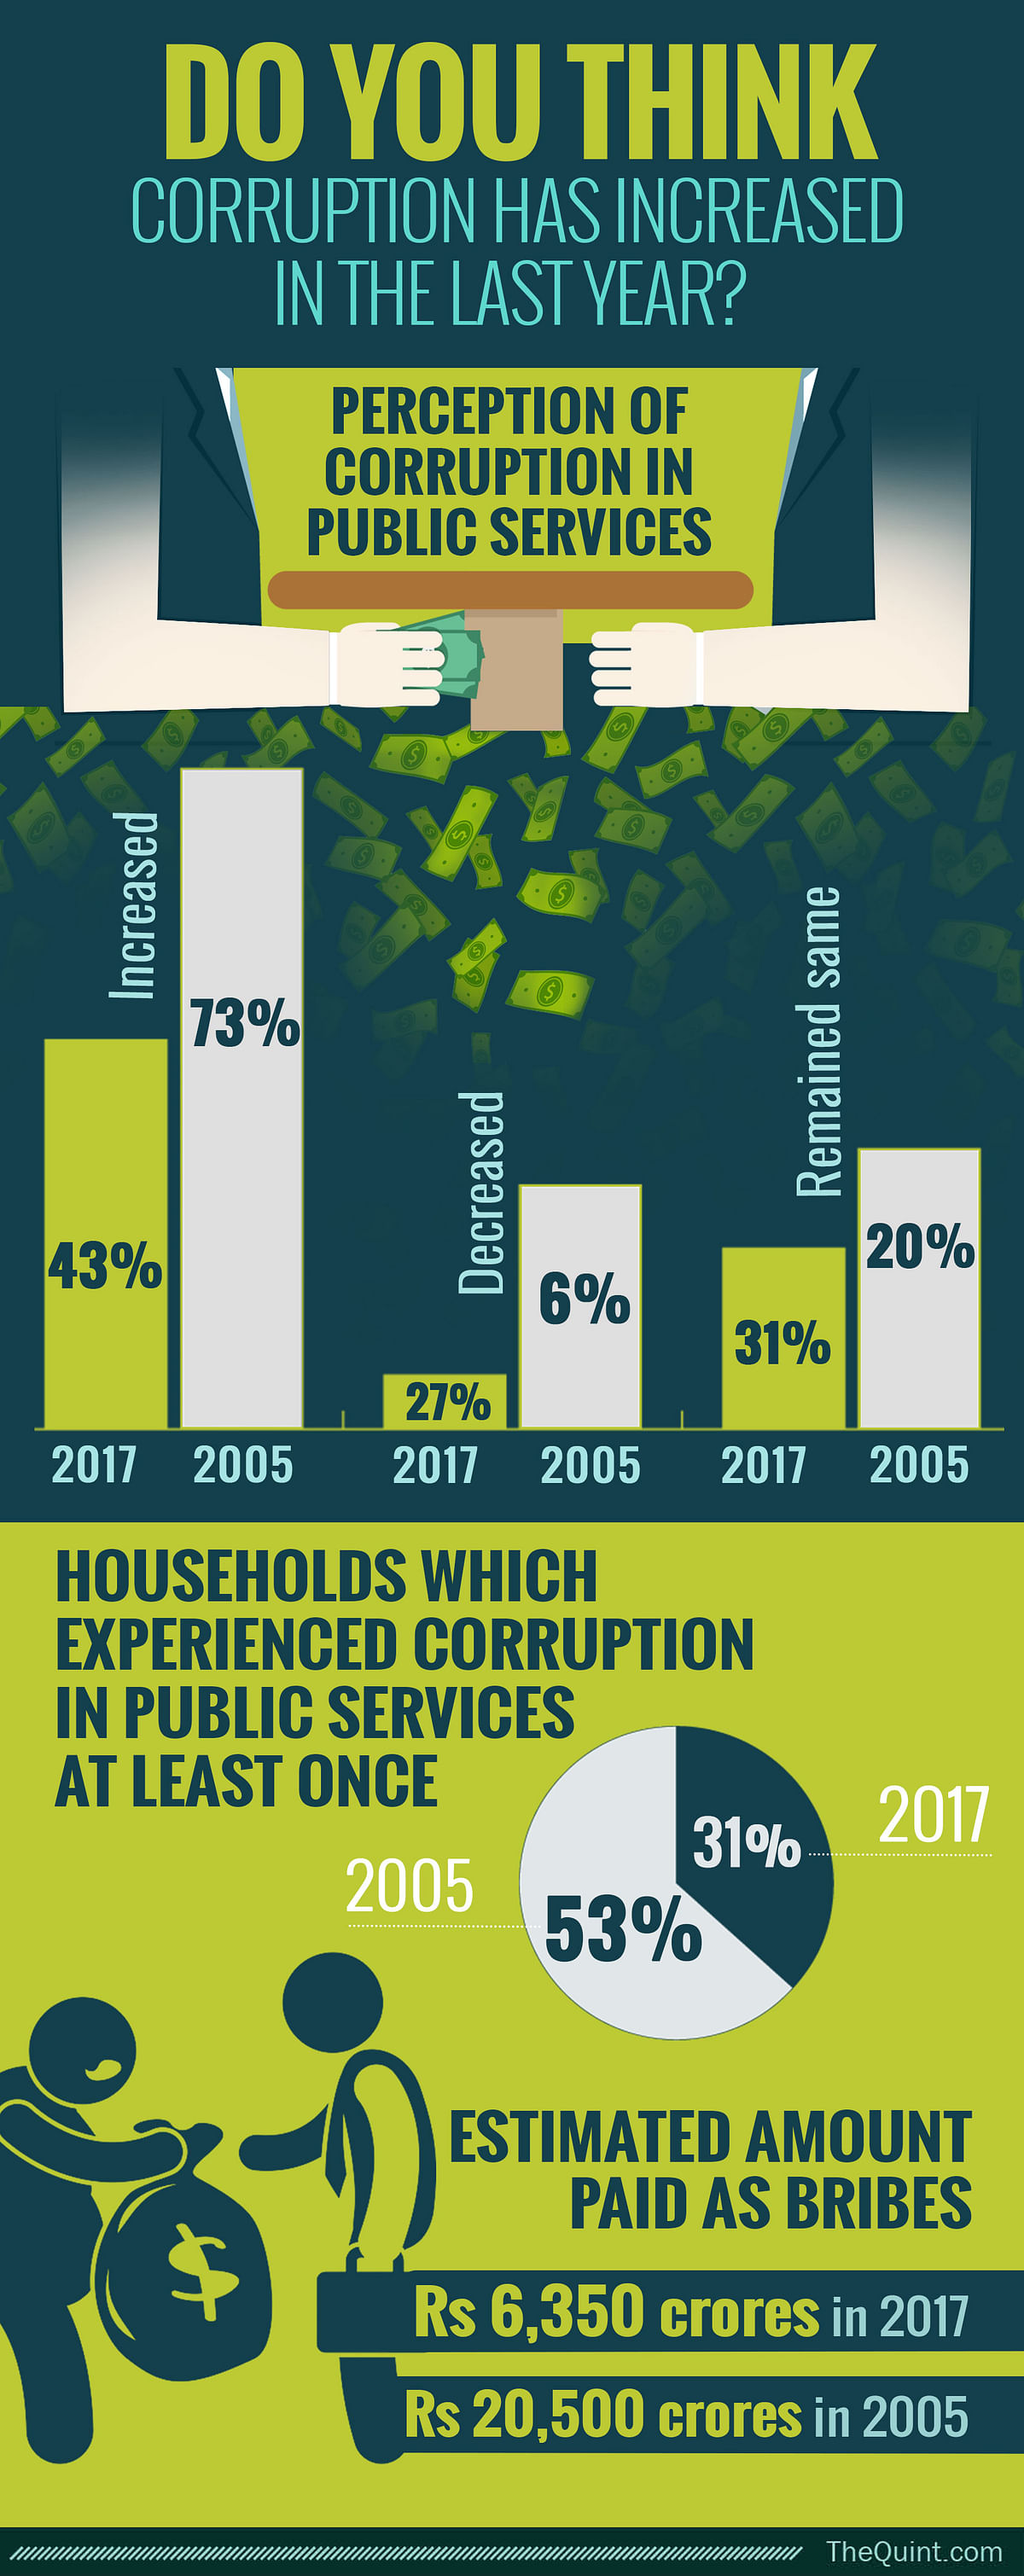 

Nearly 43% of households feel that  level of corruption in public services has increased in the past one year.